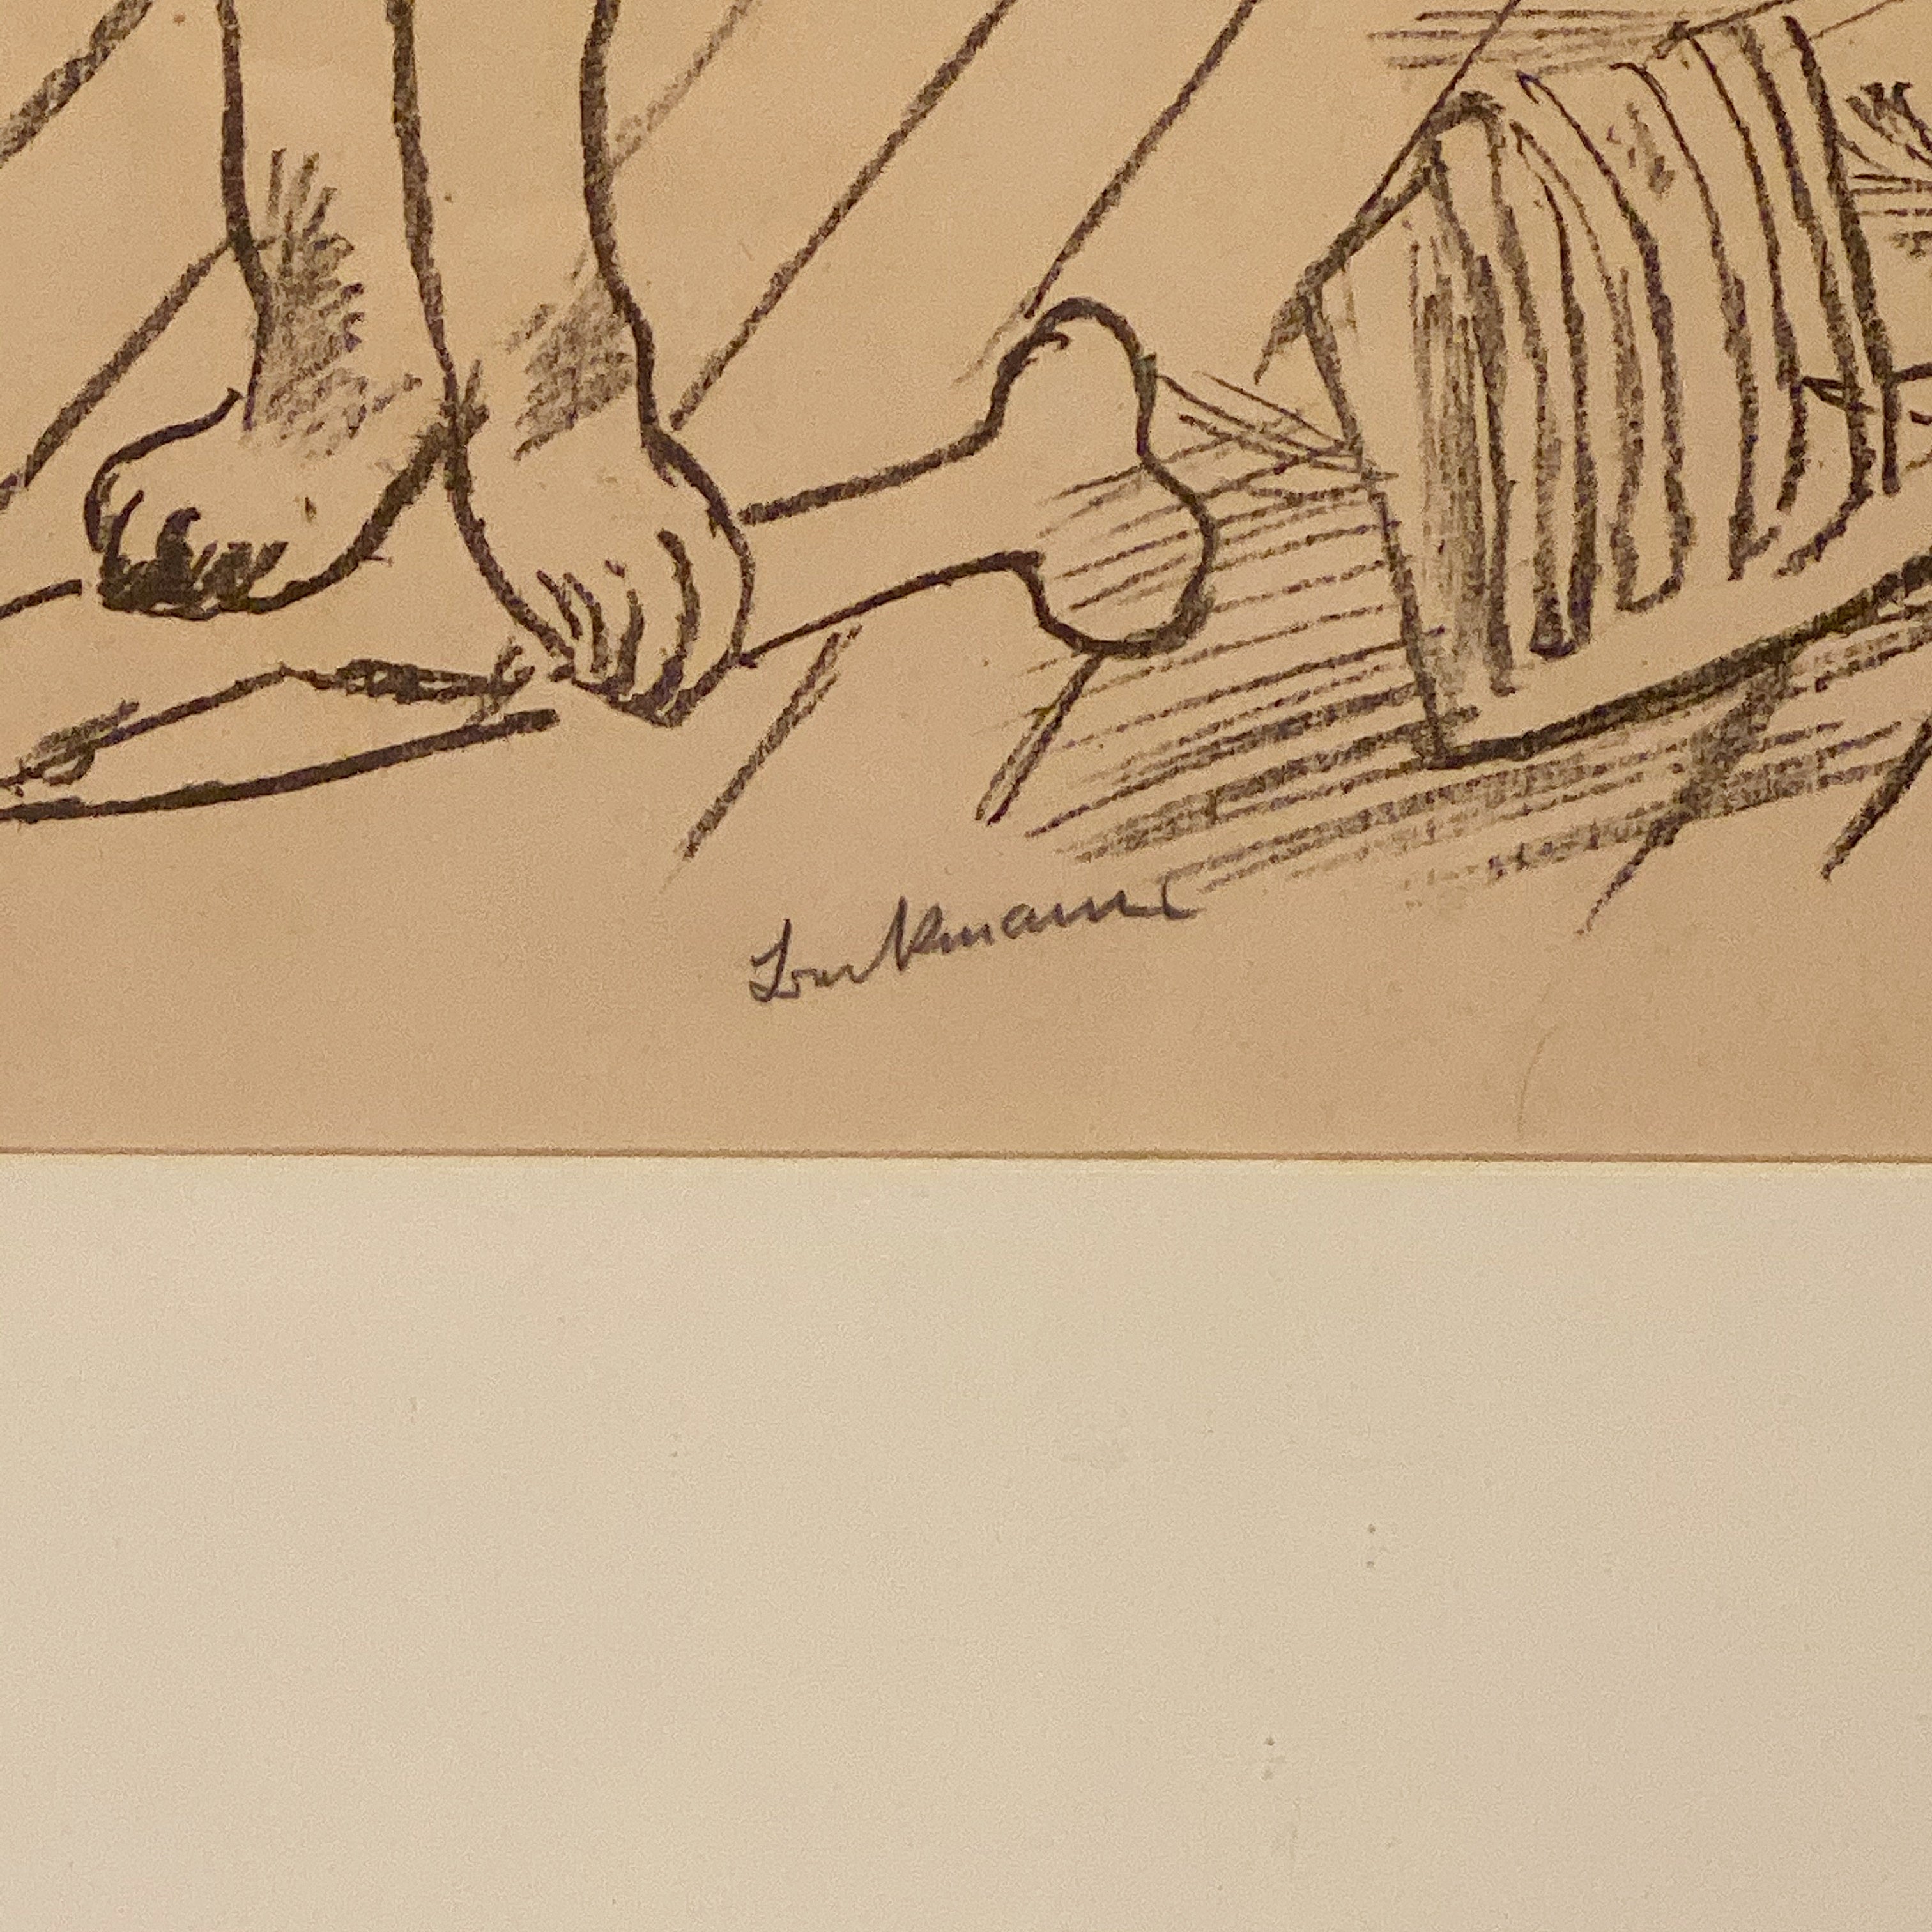 Signature of Max Beckmann Signed Lithograph - Lowenpaar - Lion Couple - 1921 - Rare Pencil Signed Limited Edition - Degenerate Art - German Expressionism